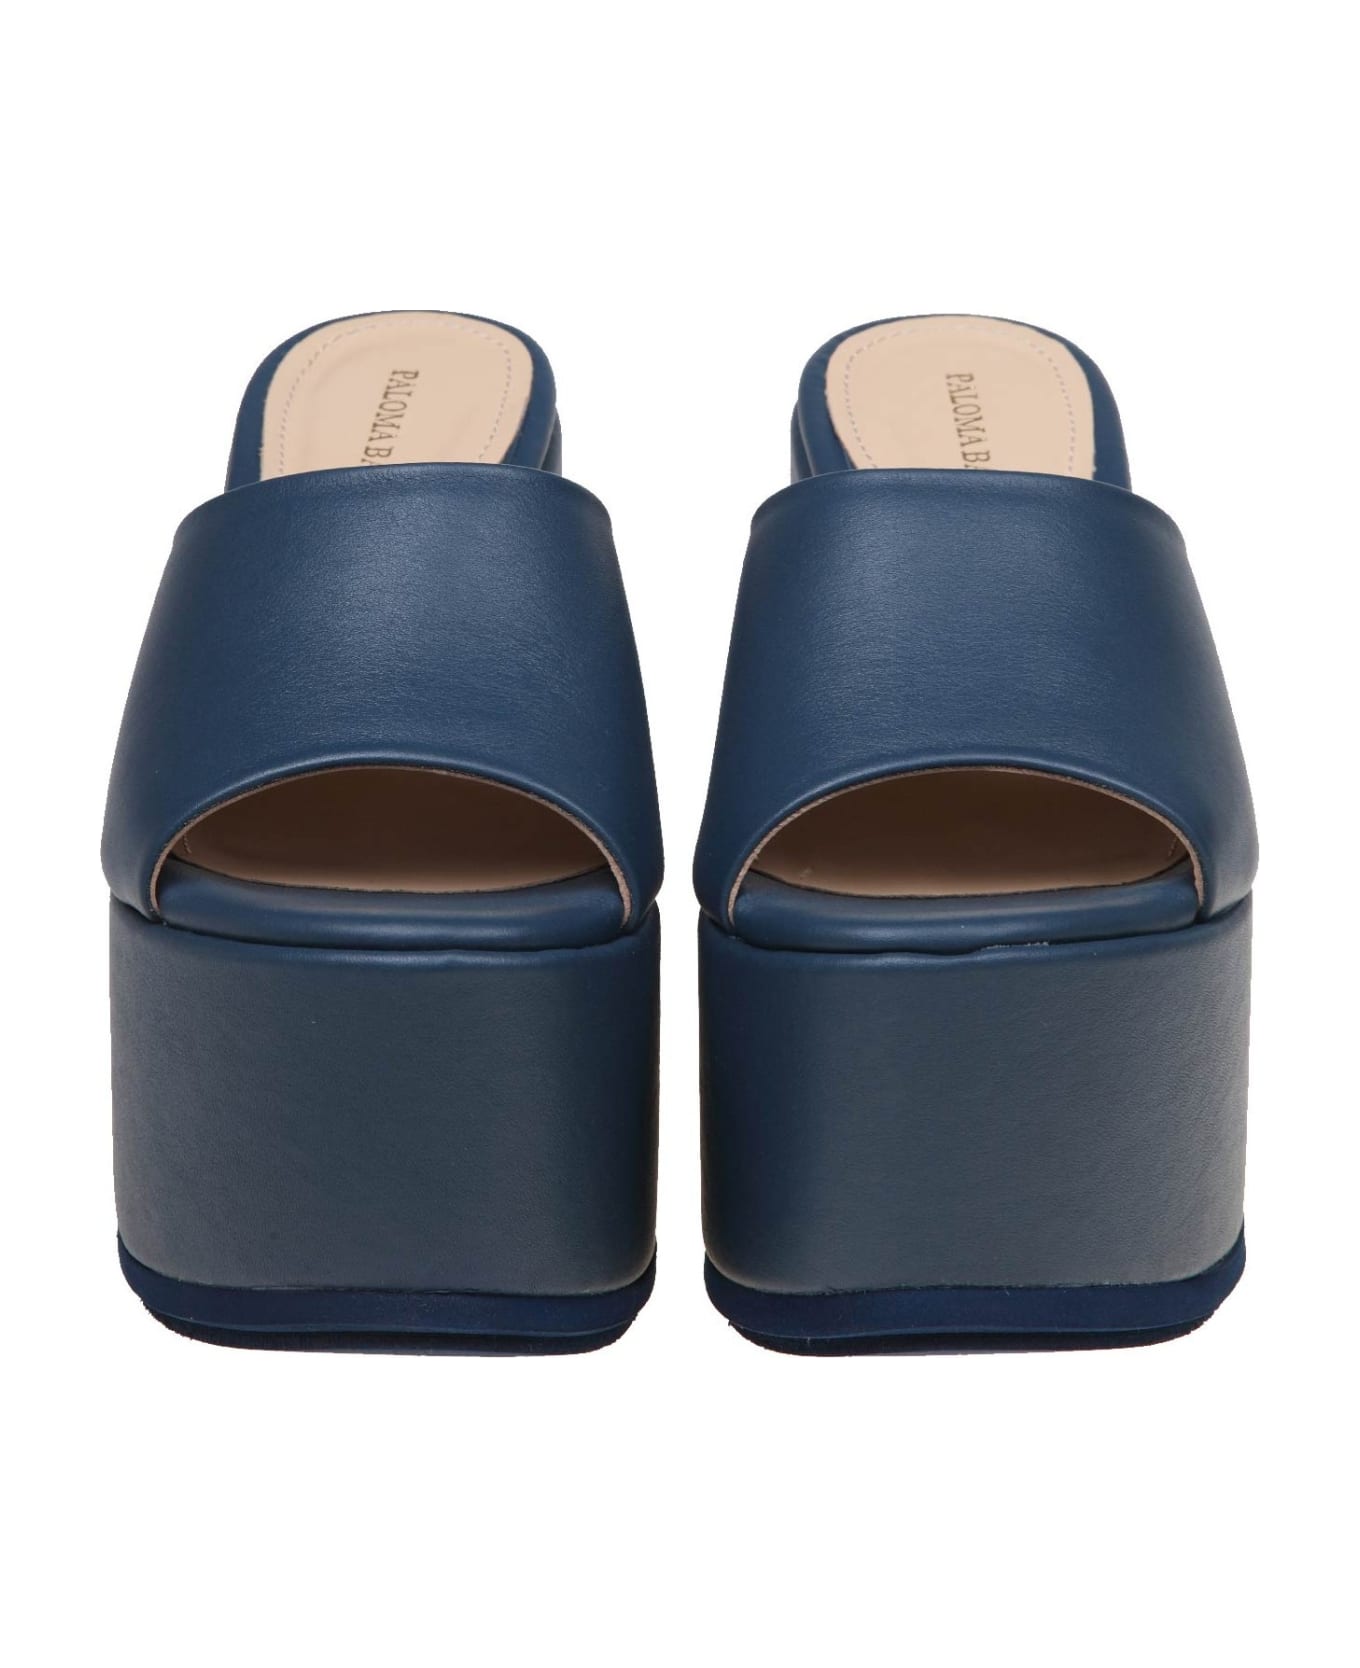 Paloma Barceló Hyana Mules In Blue Leather - Indigo